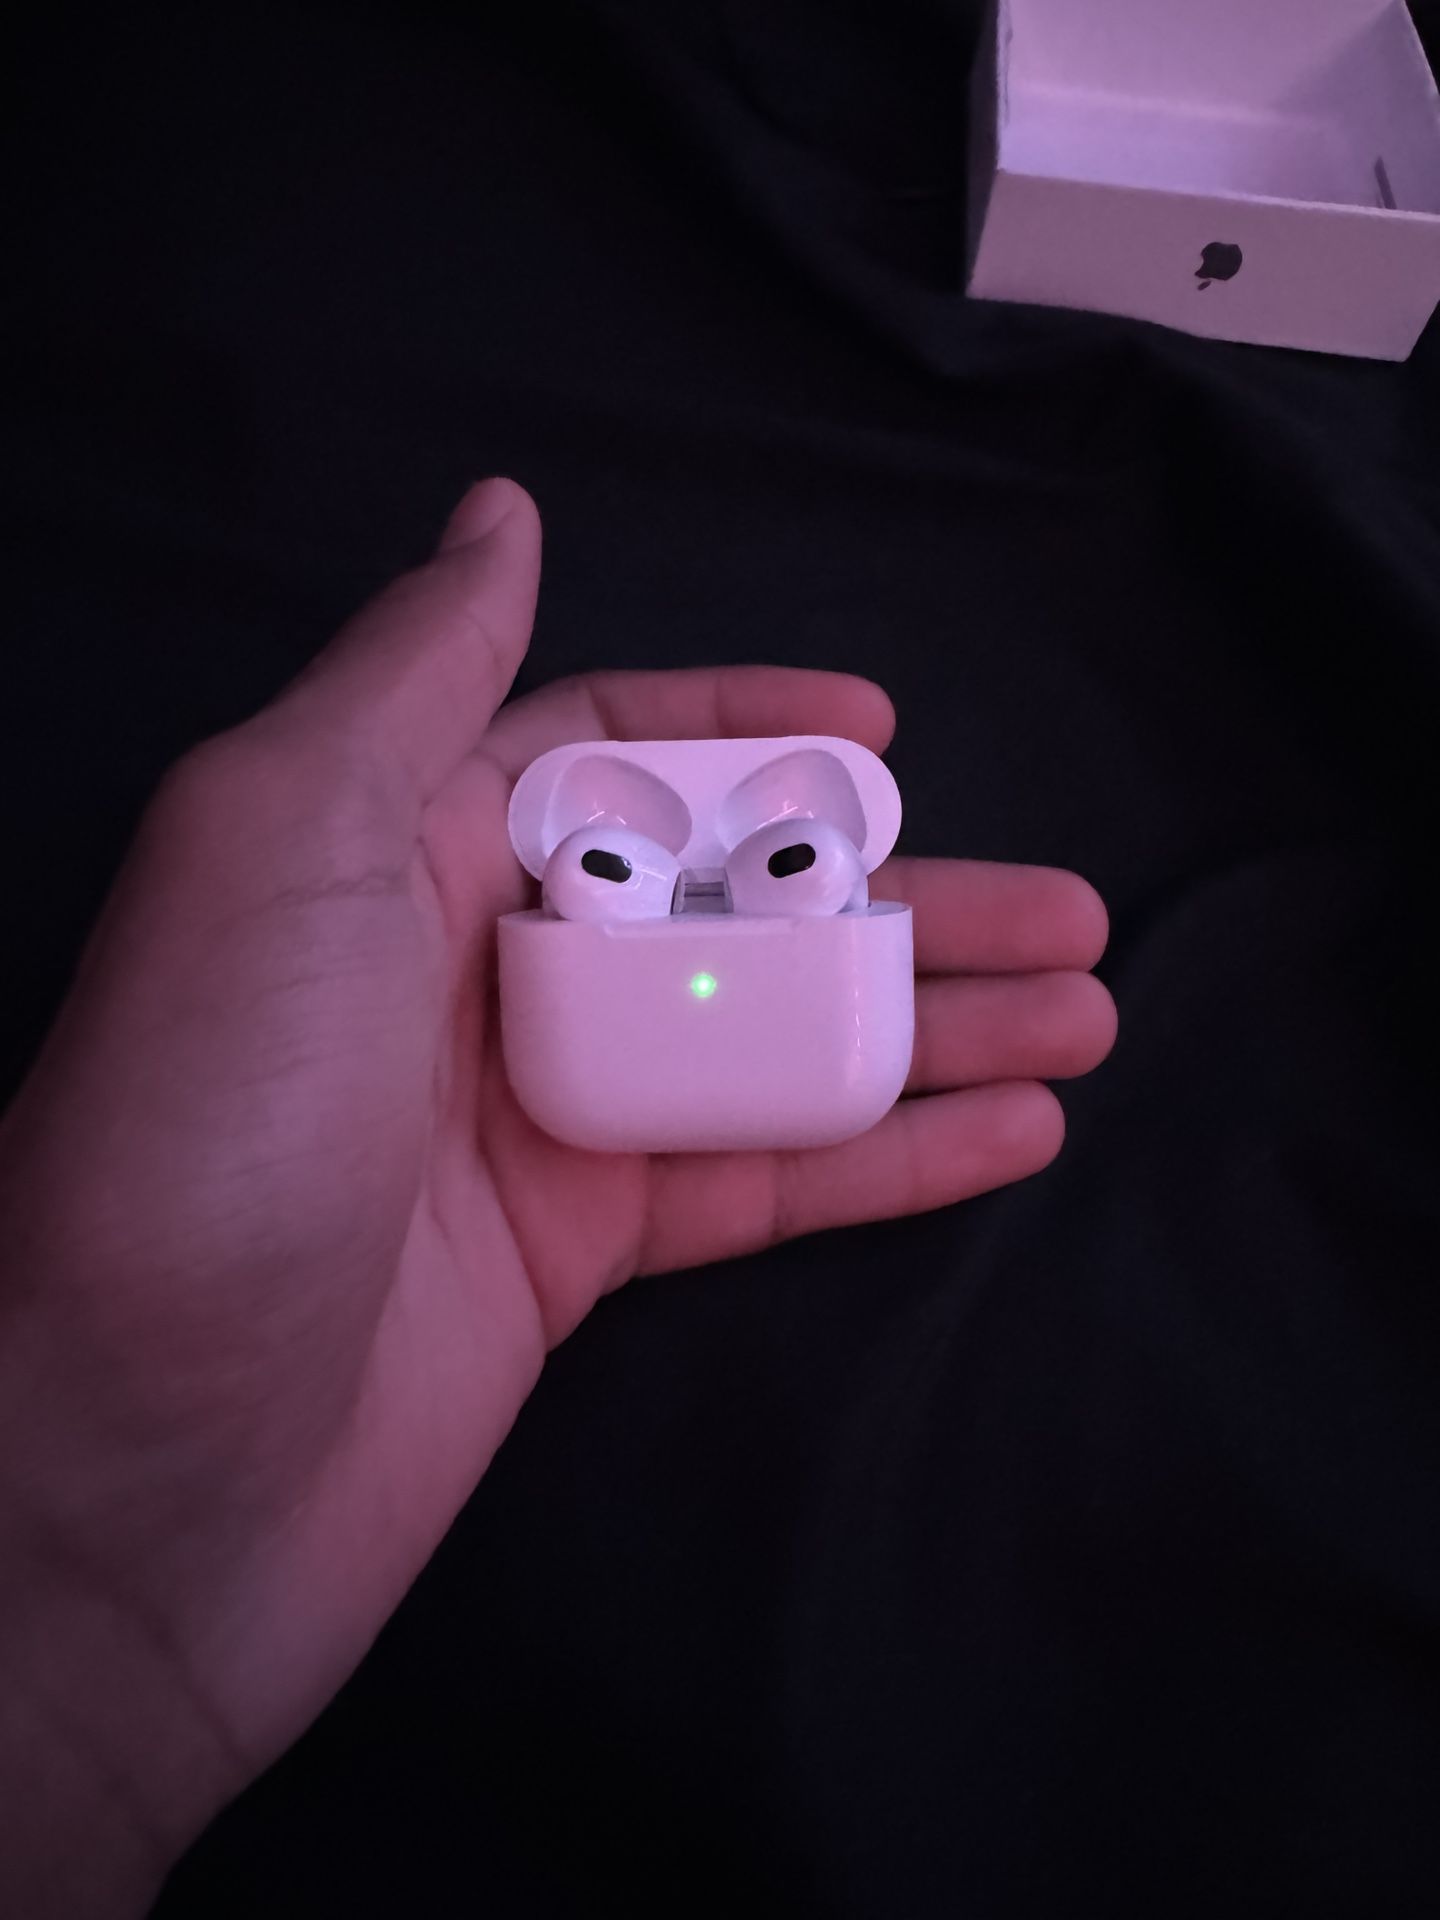 3rd generation airpods 